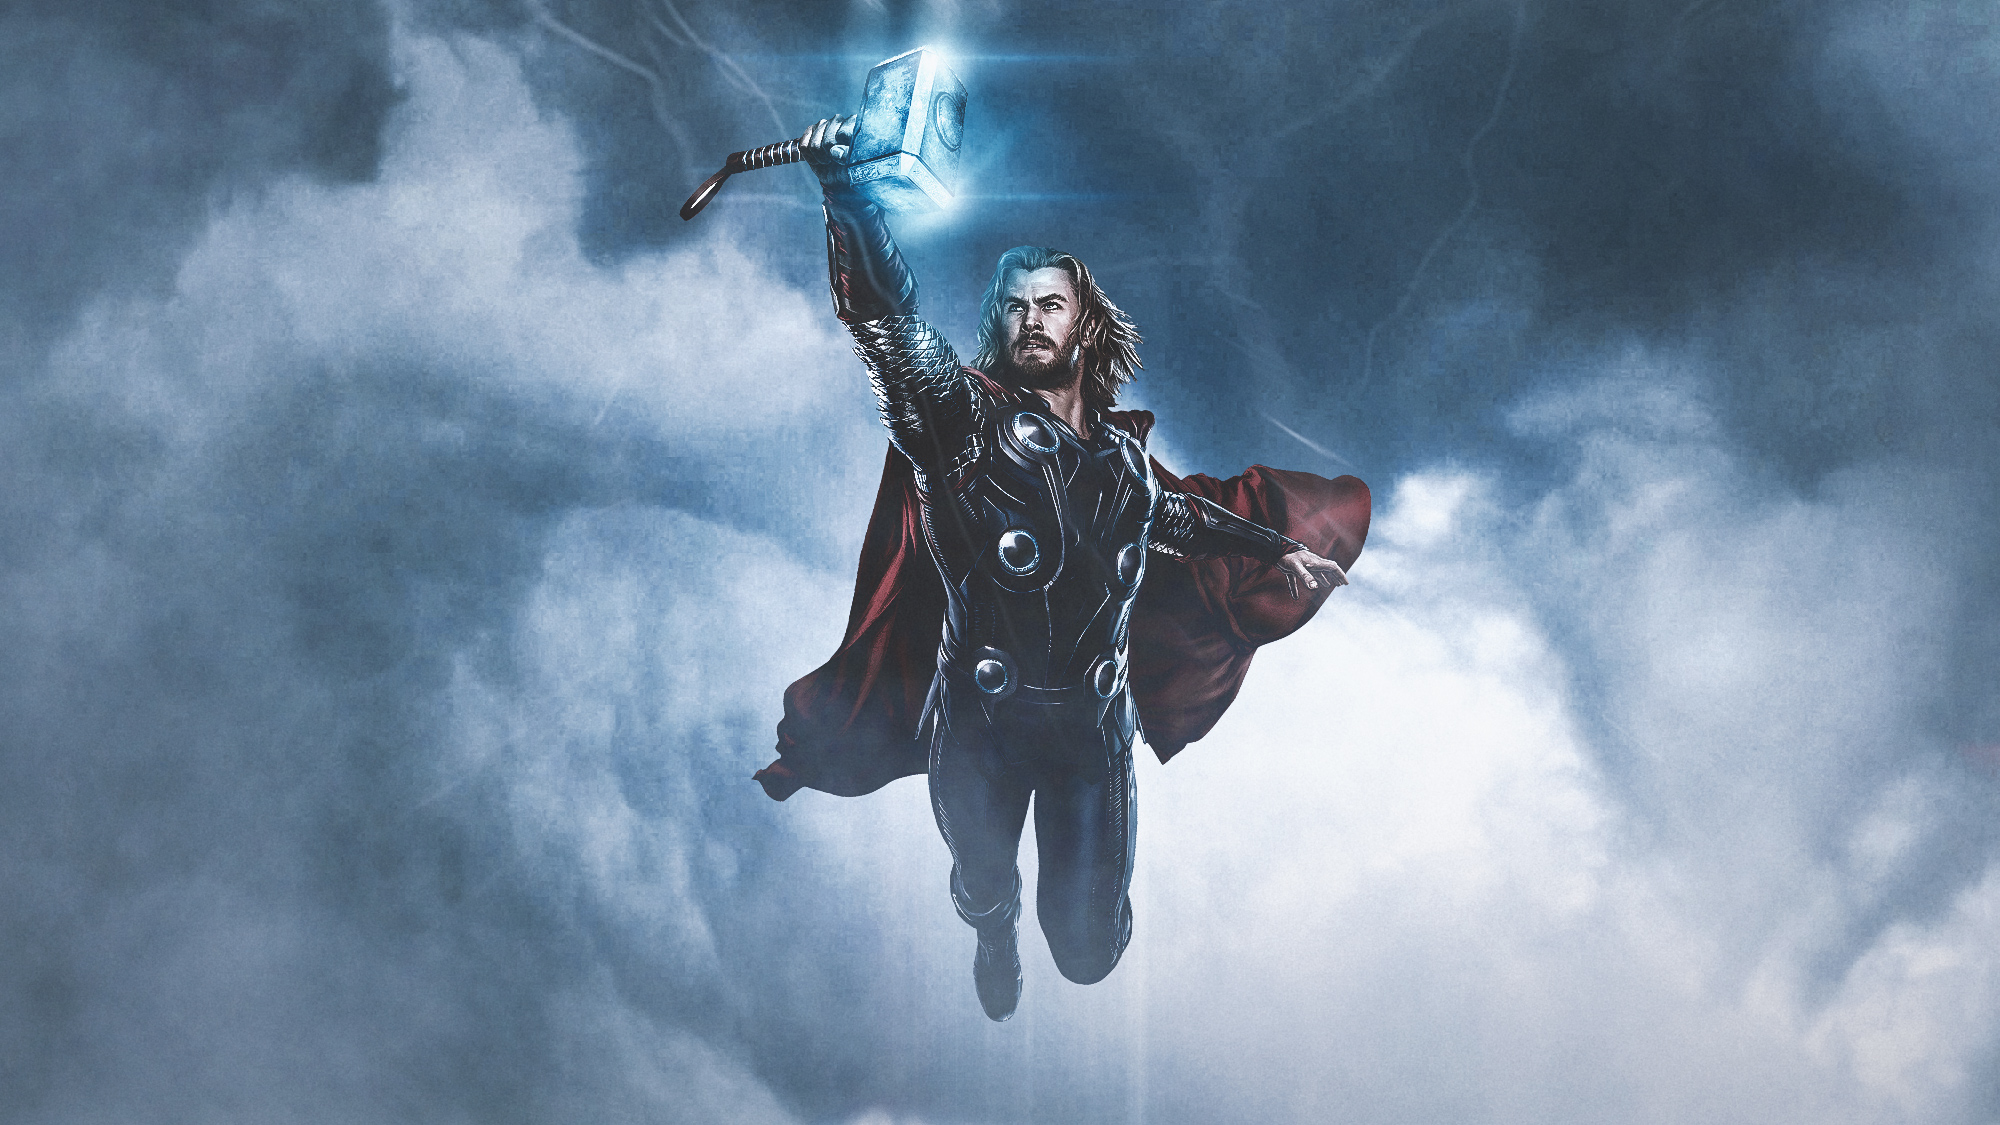 Thor flying into the clouds